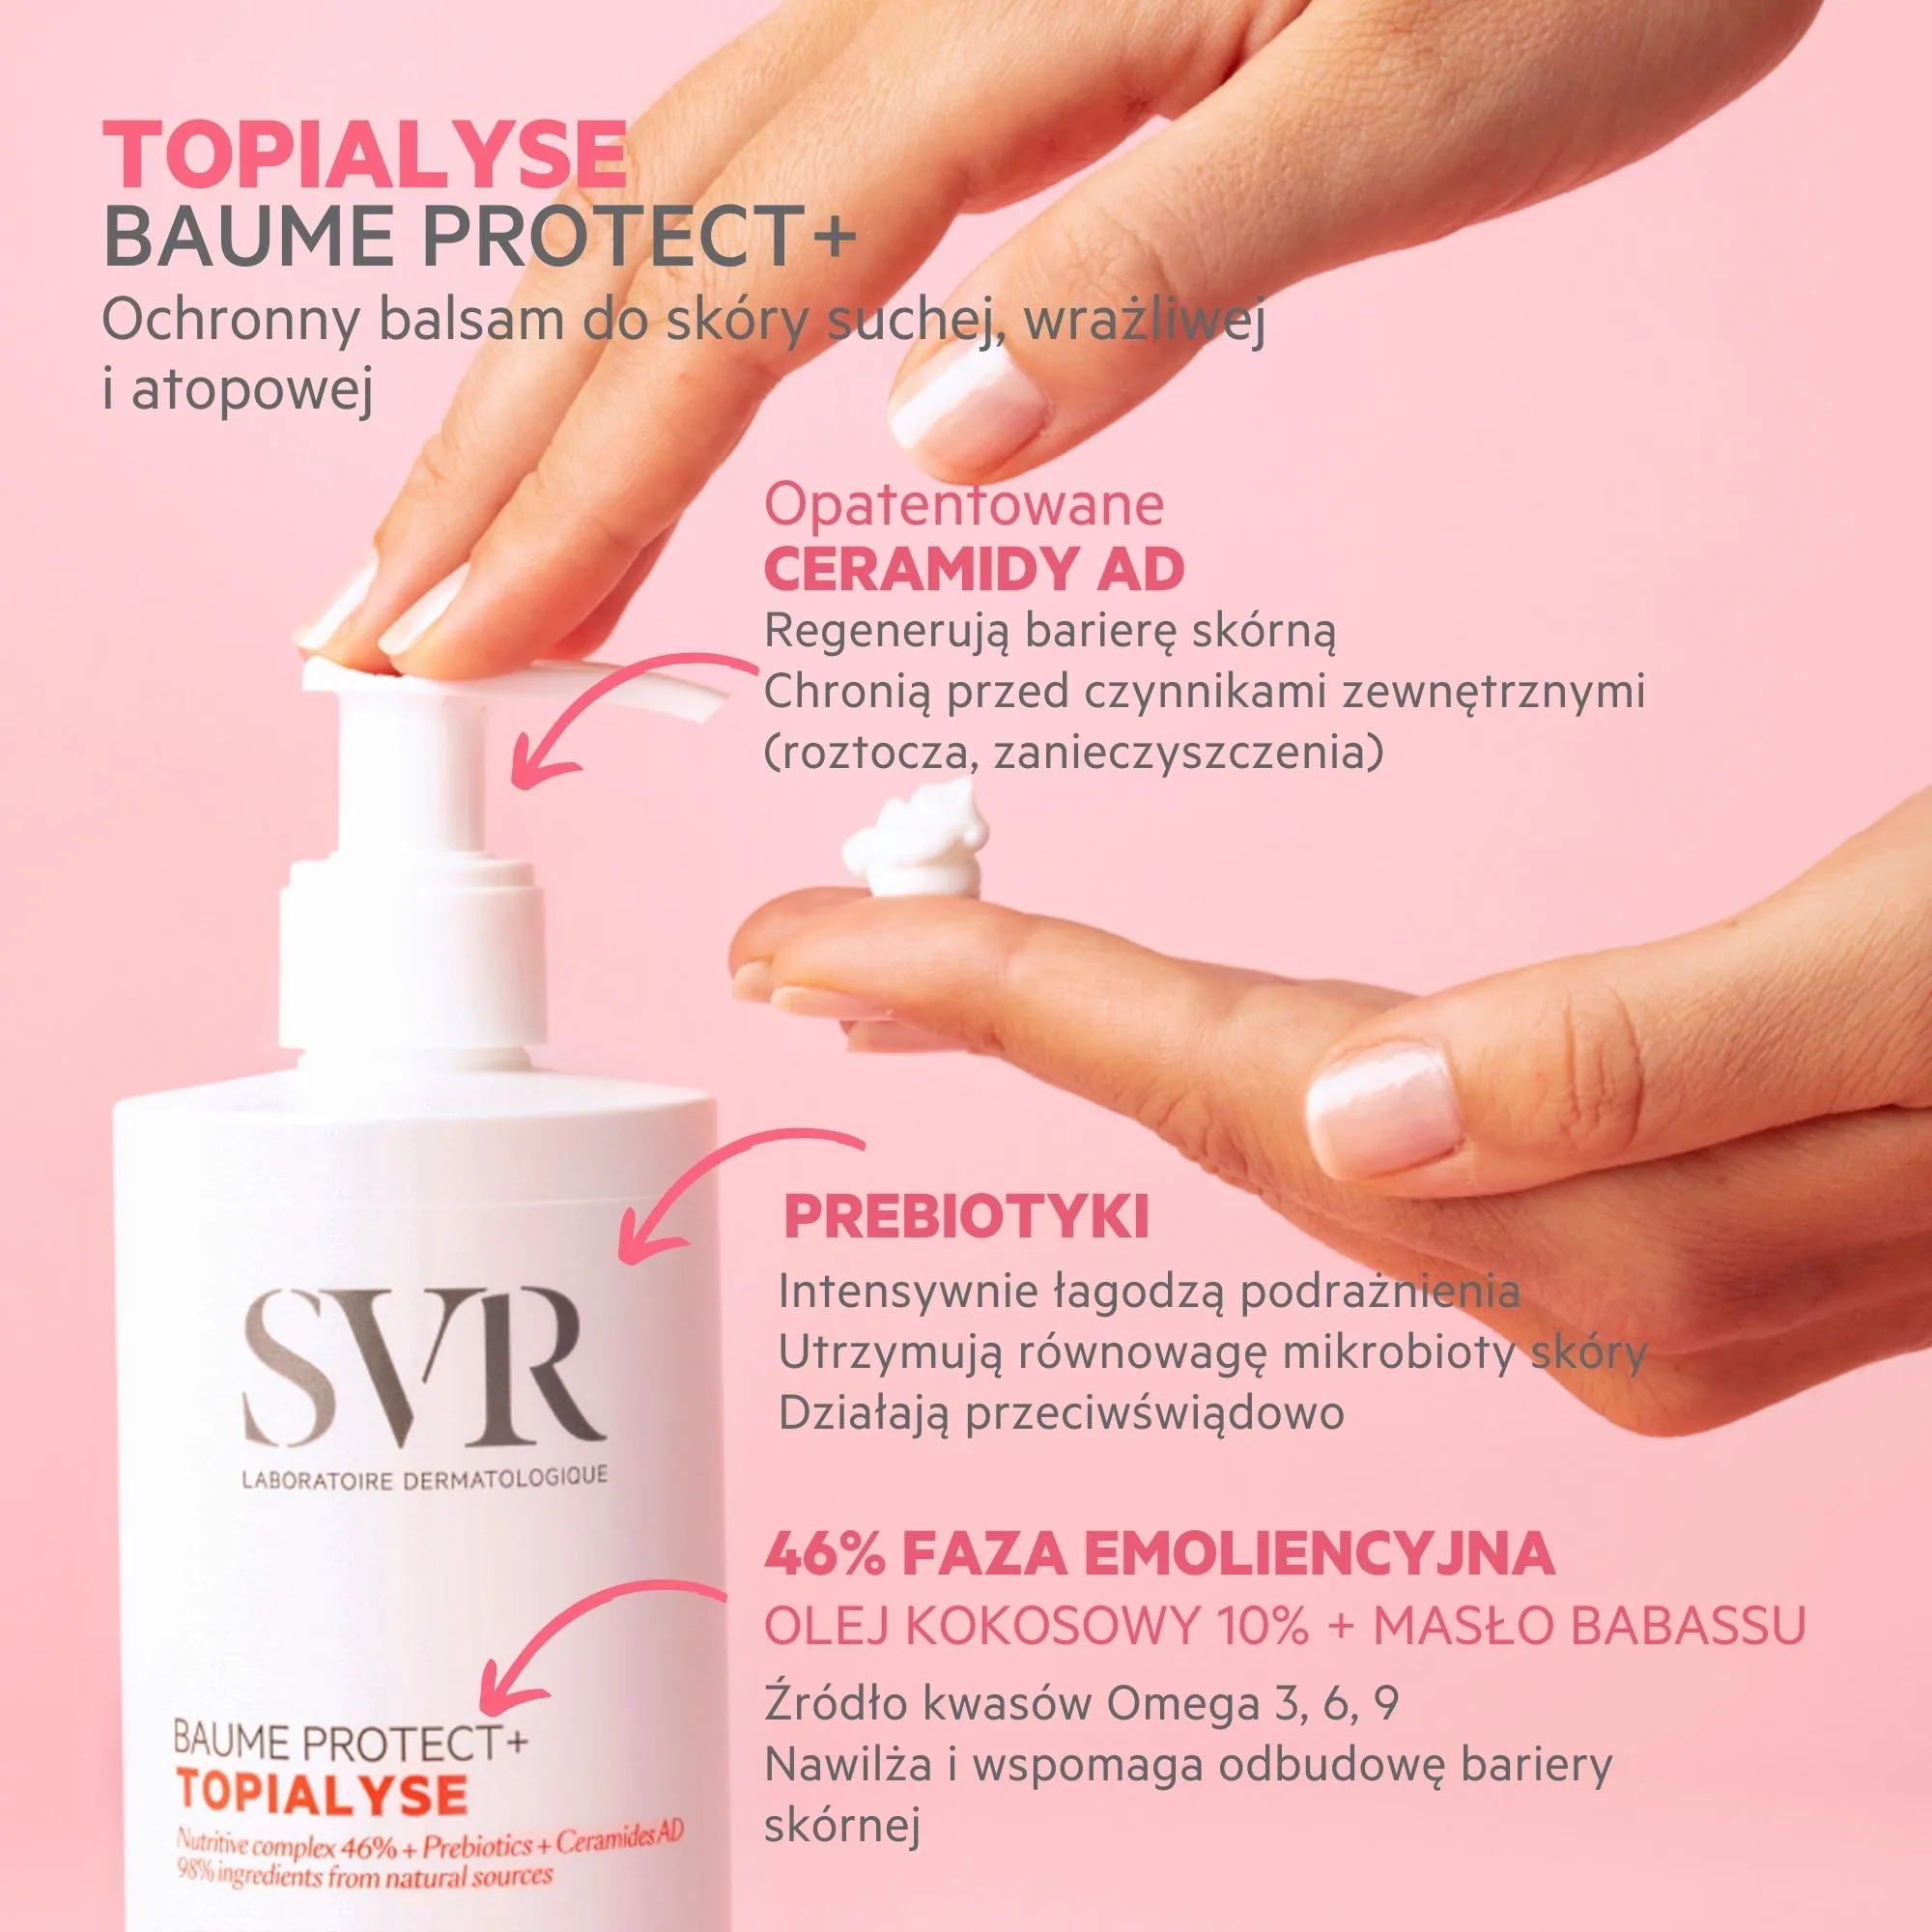 SVR Topialyse Baume Protect+, balsam, 400 ml 